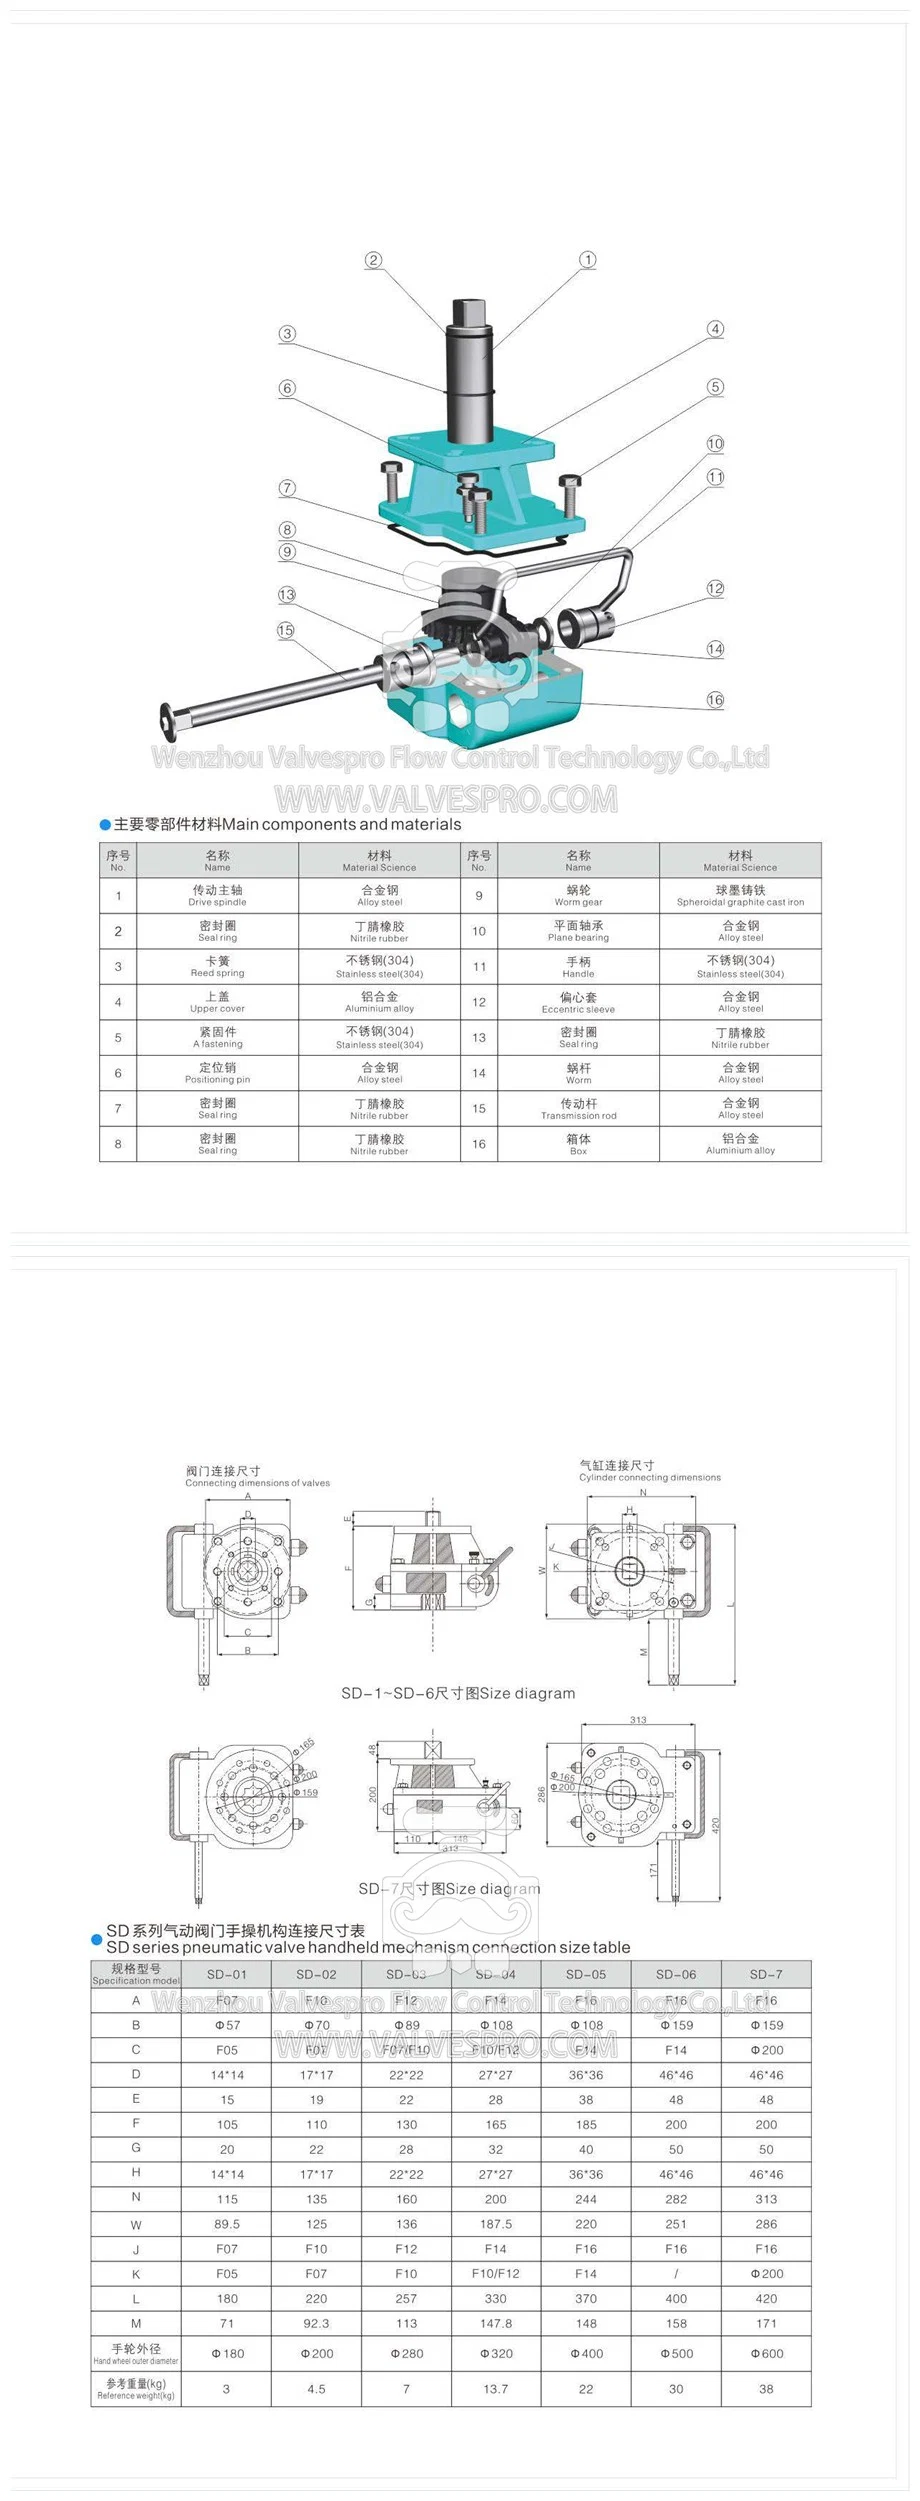 Hand Wheel Operated Declutchable Manual Override for Rotary Actuator Valve Gearbox